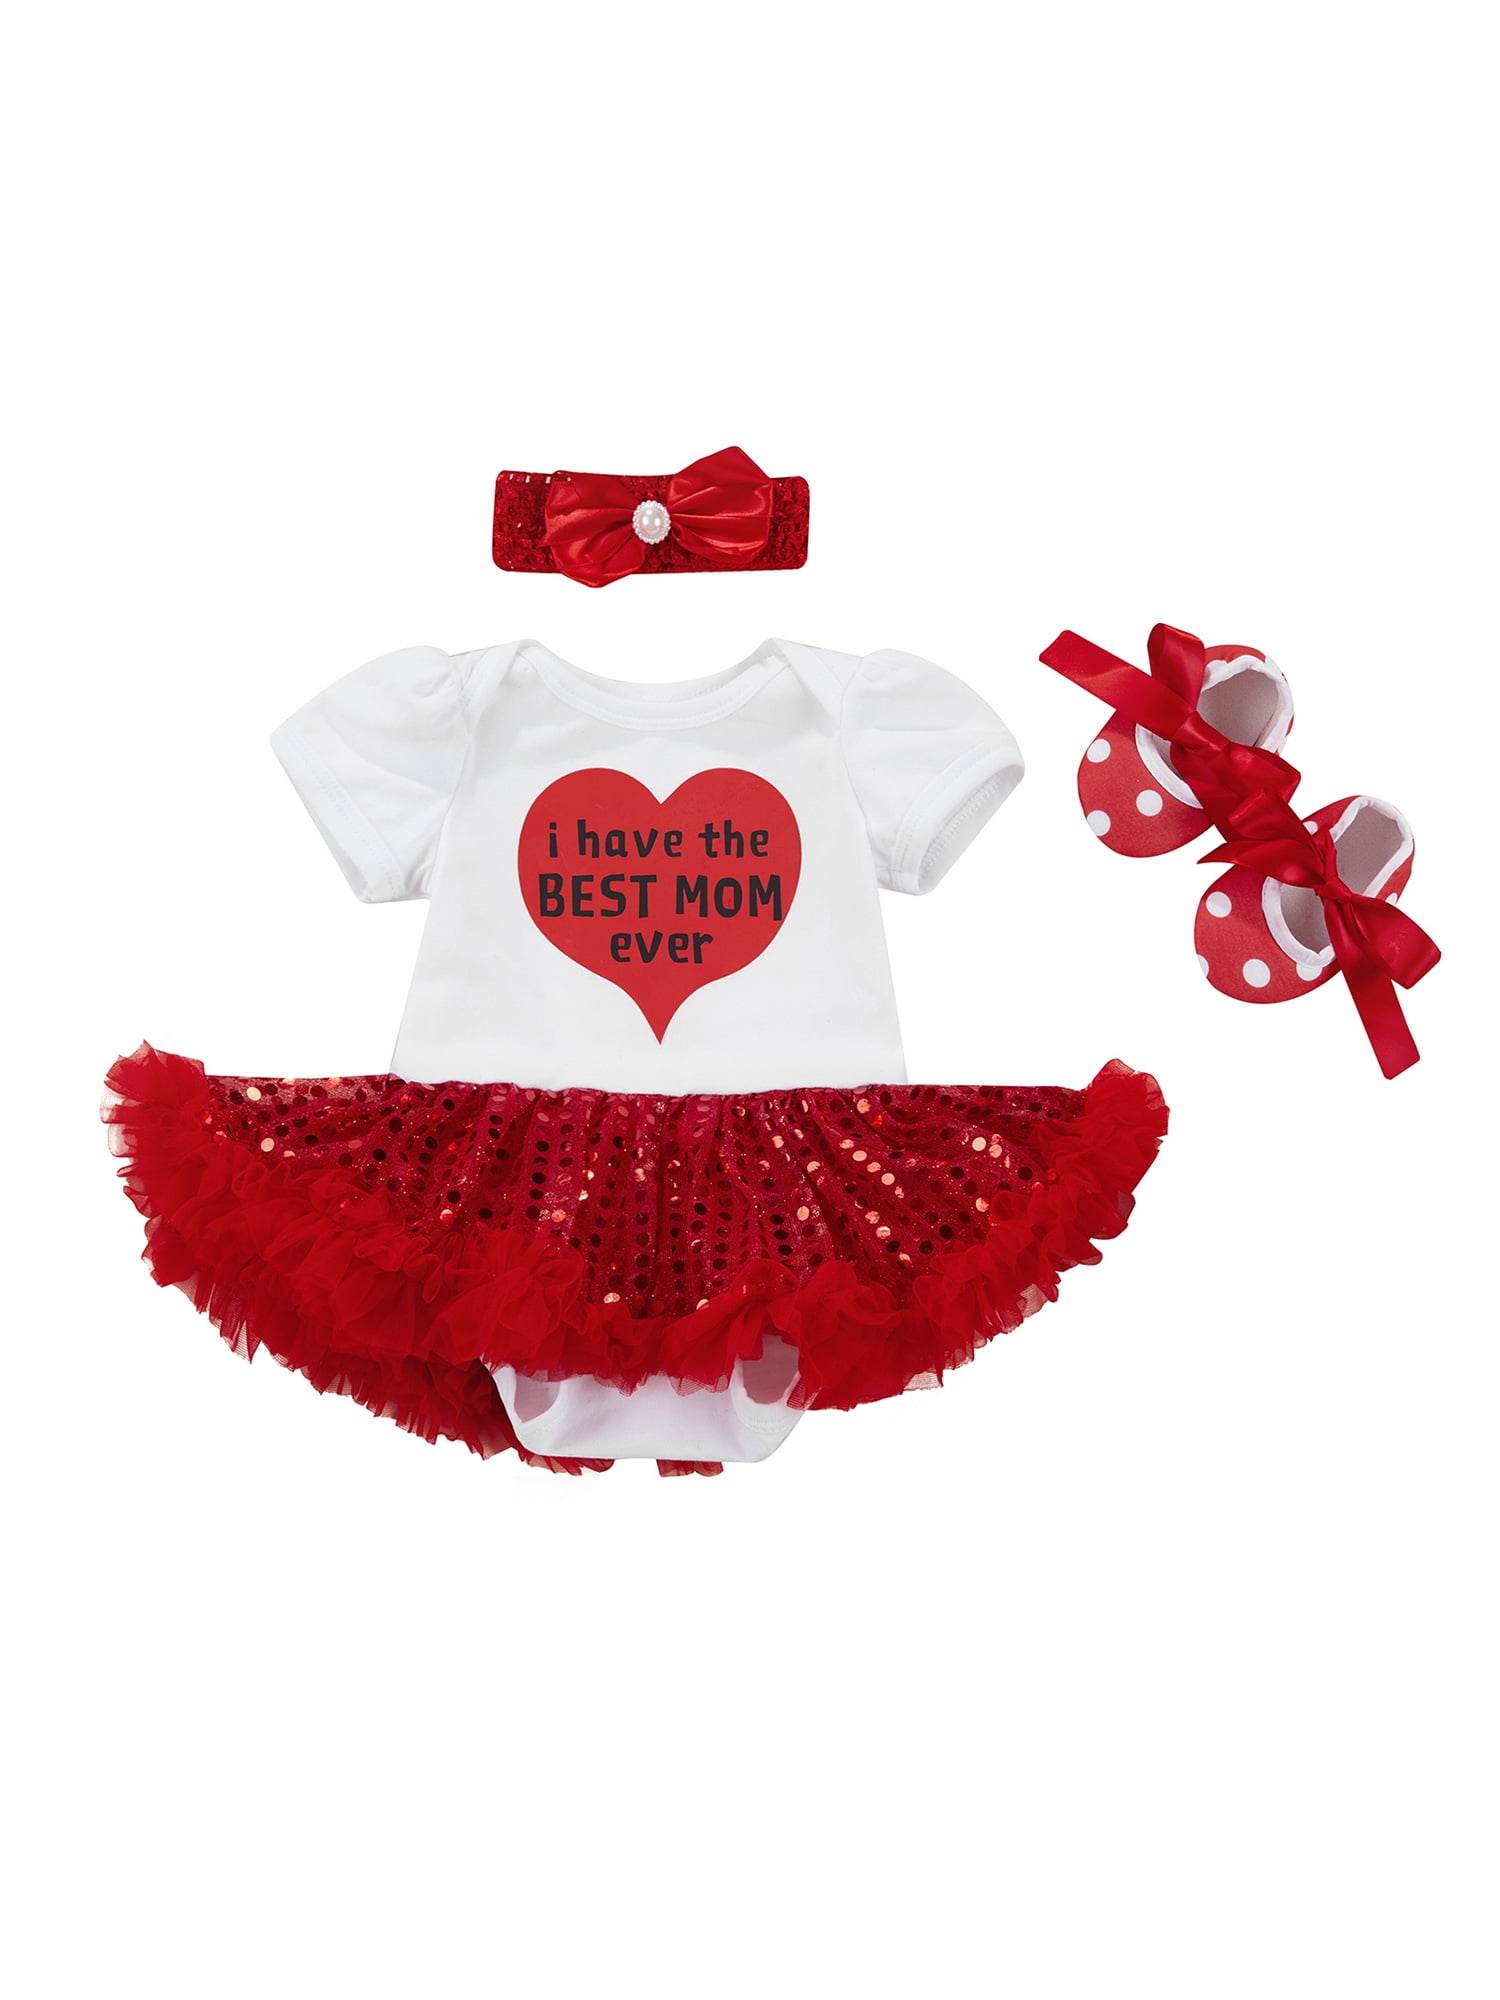 Aunavey Newborn Infant Baby Girls Valentines Day Outfit Short Sleeve ...